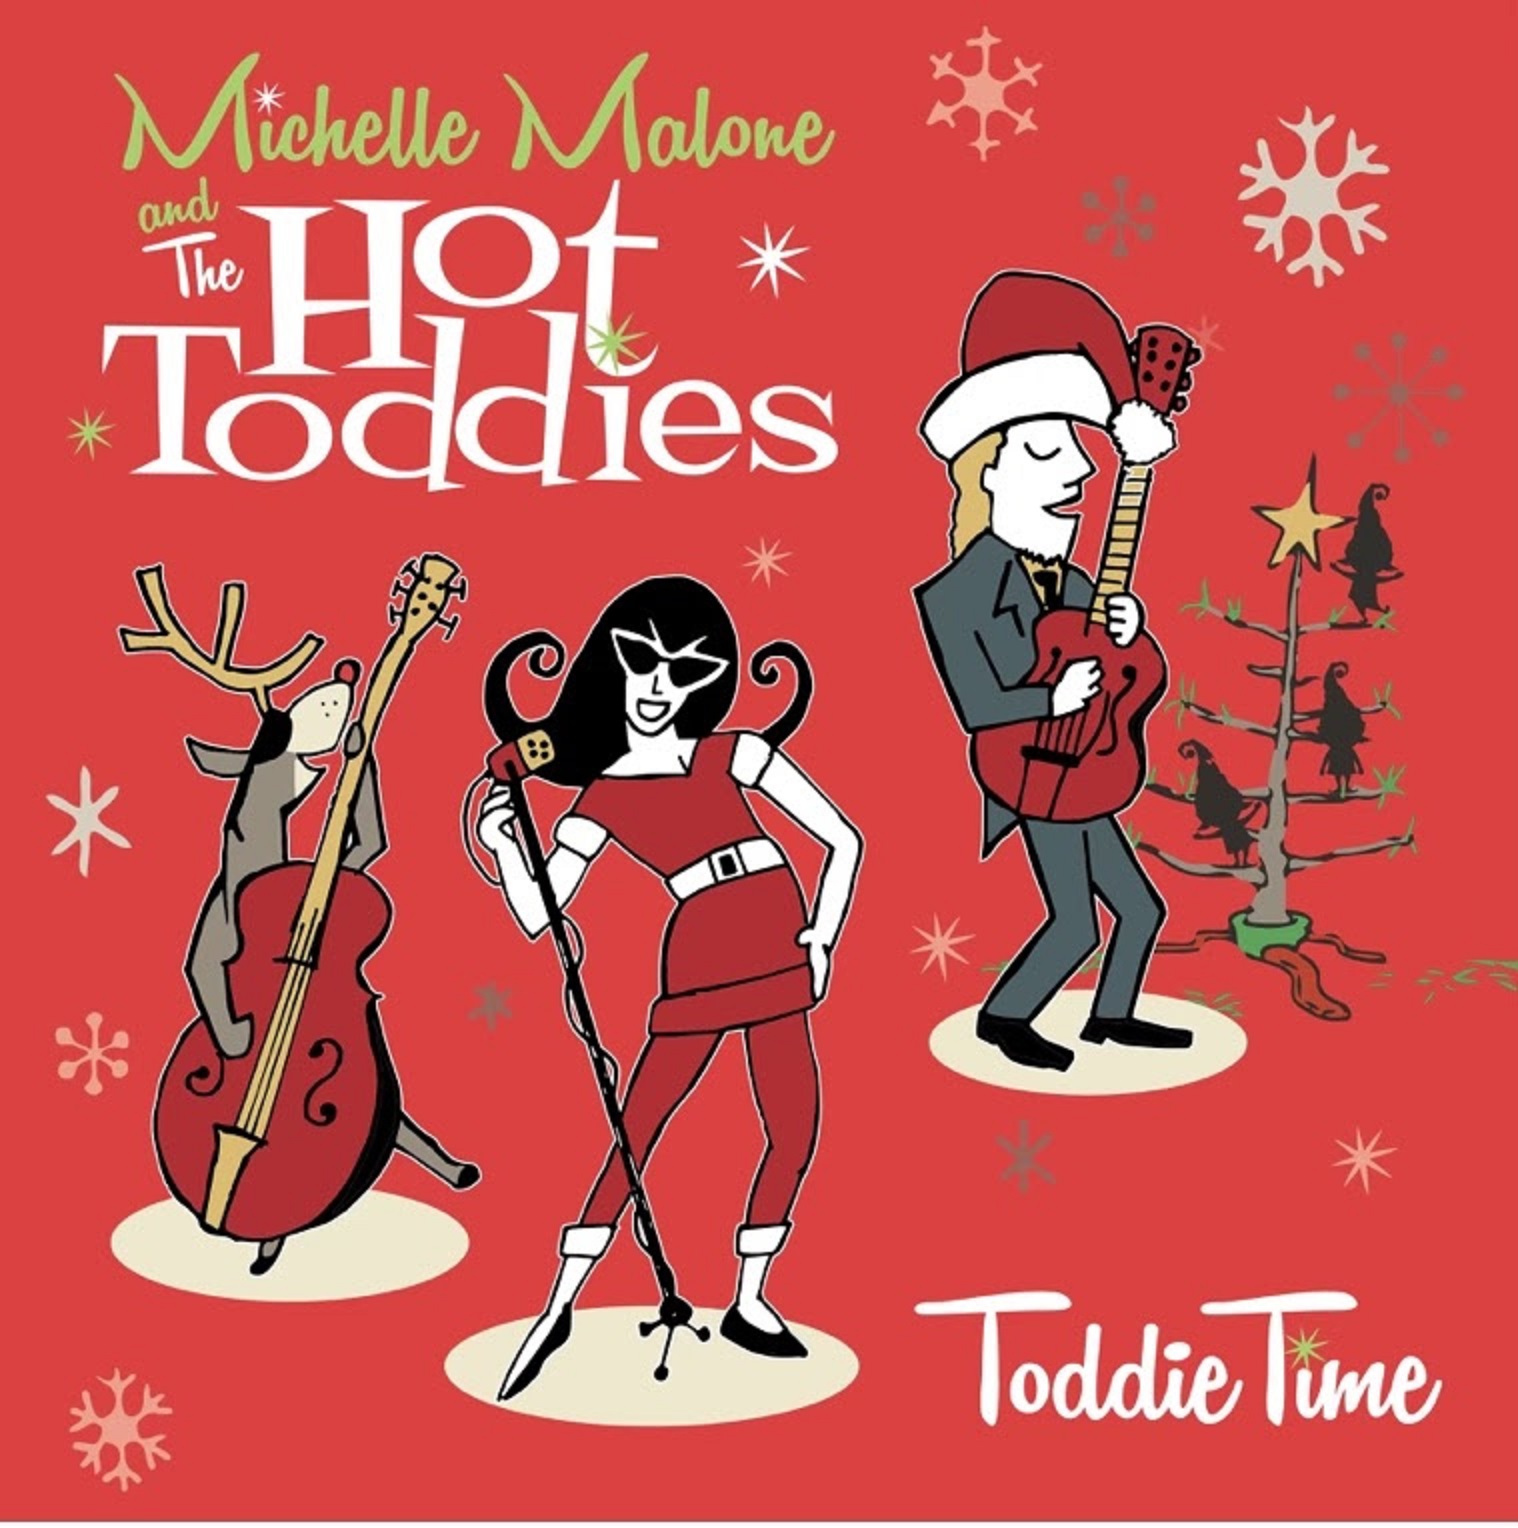 Michelle Malone & The Hot Toddies Bring Holiday Cheer with Toddie Time